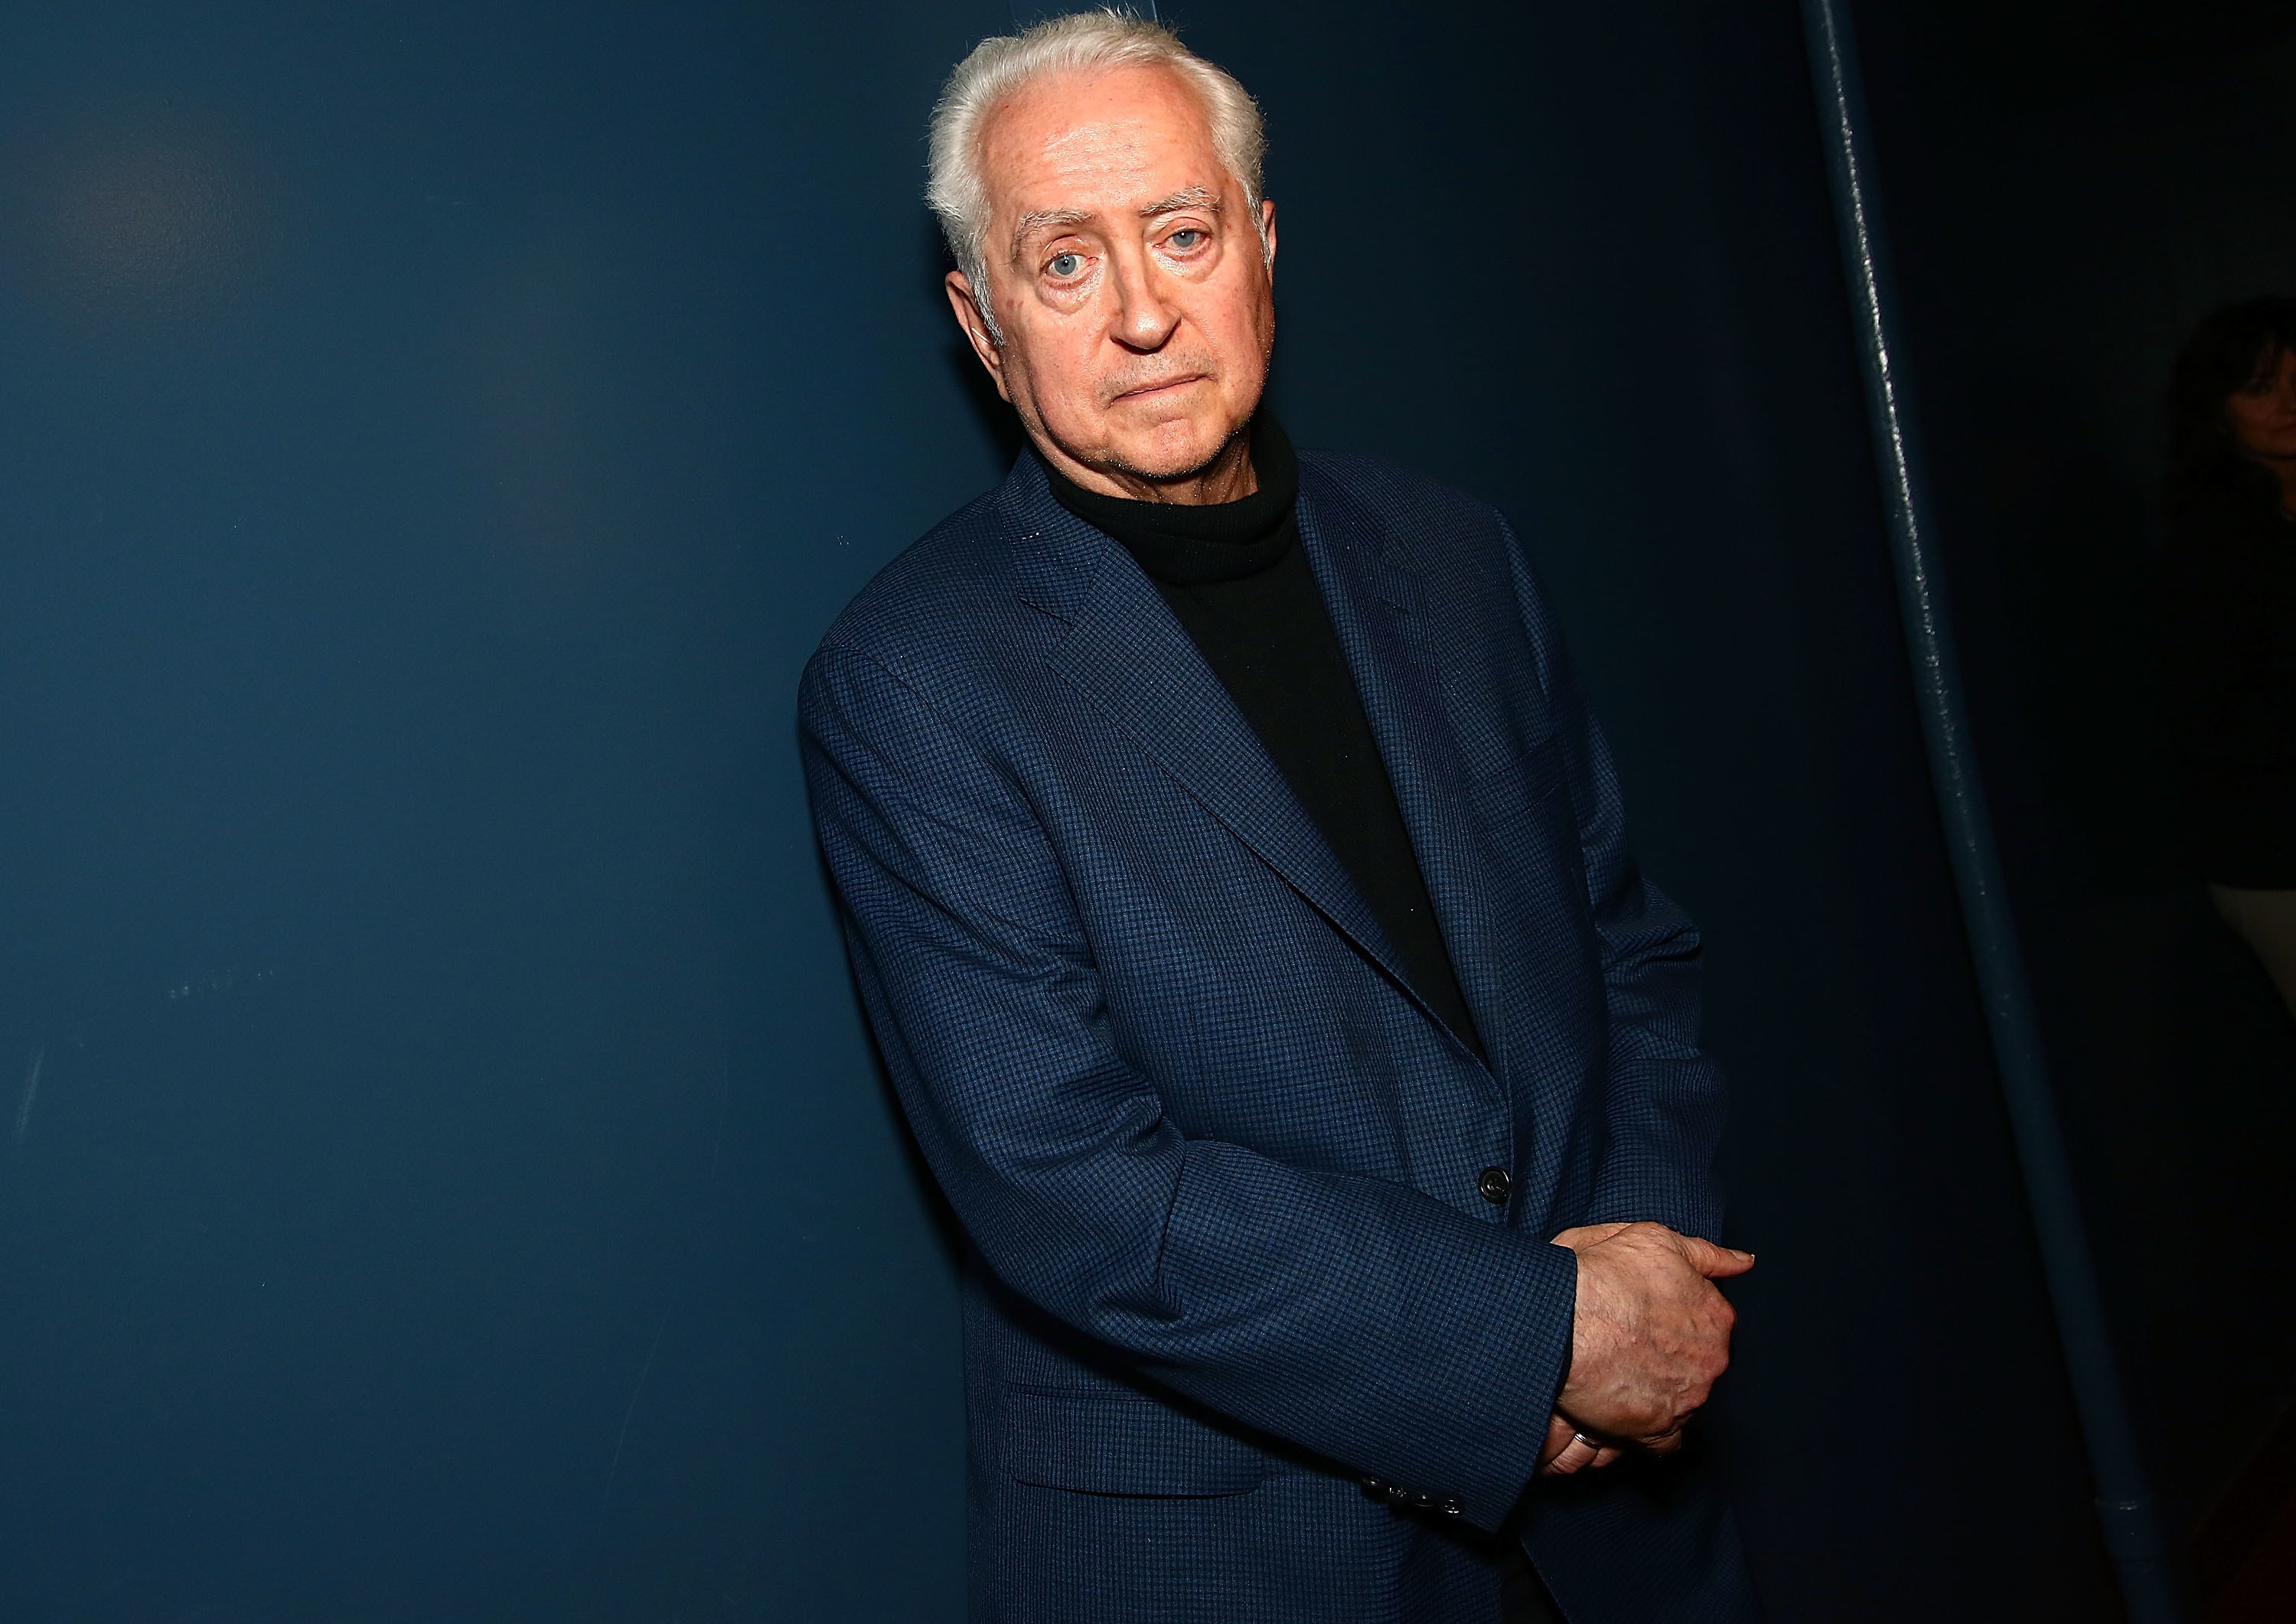 Robert Downey Sr in a suit looking at the camera